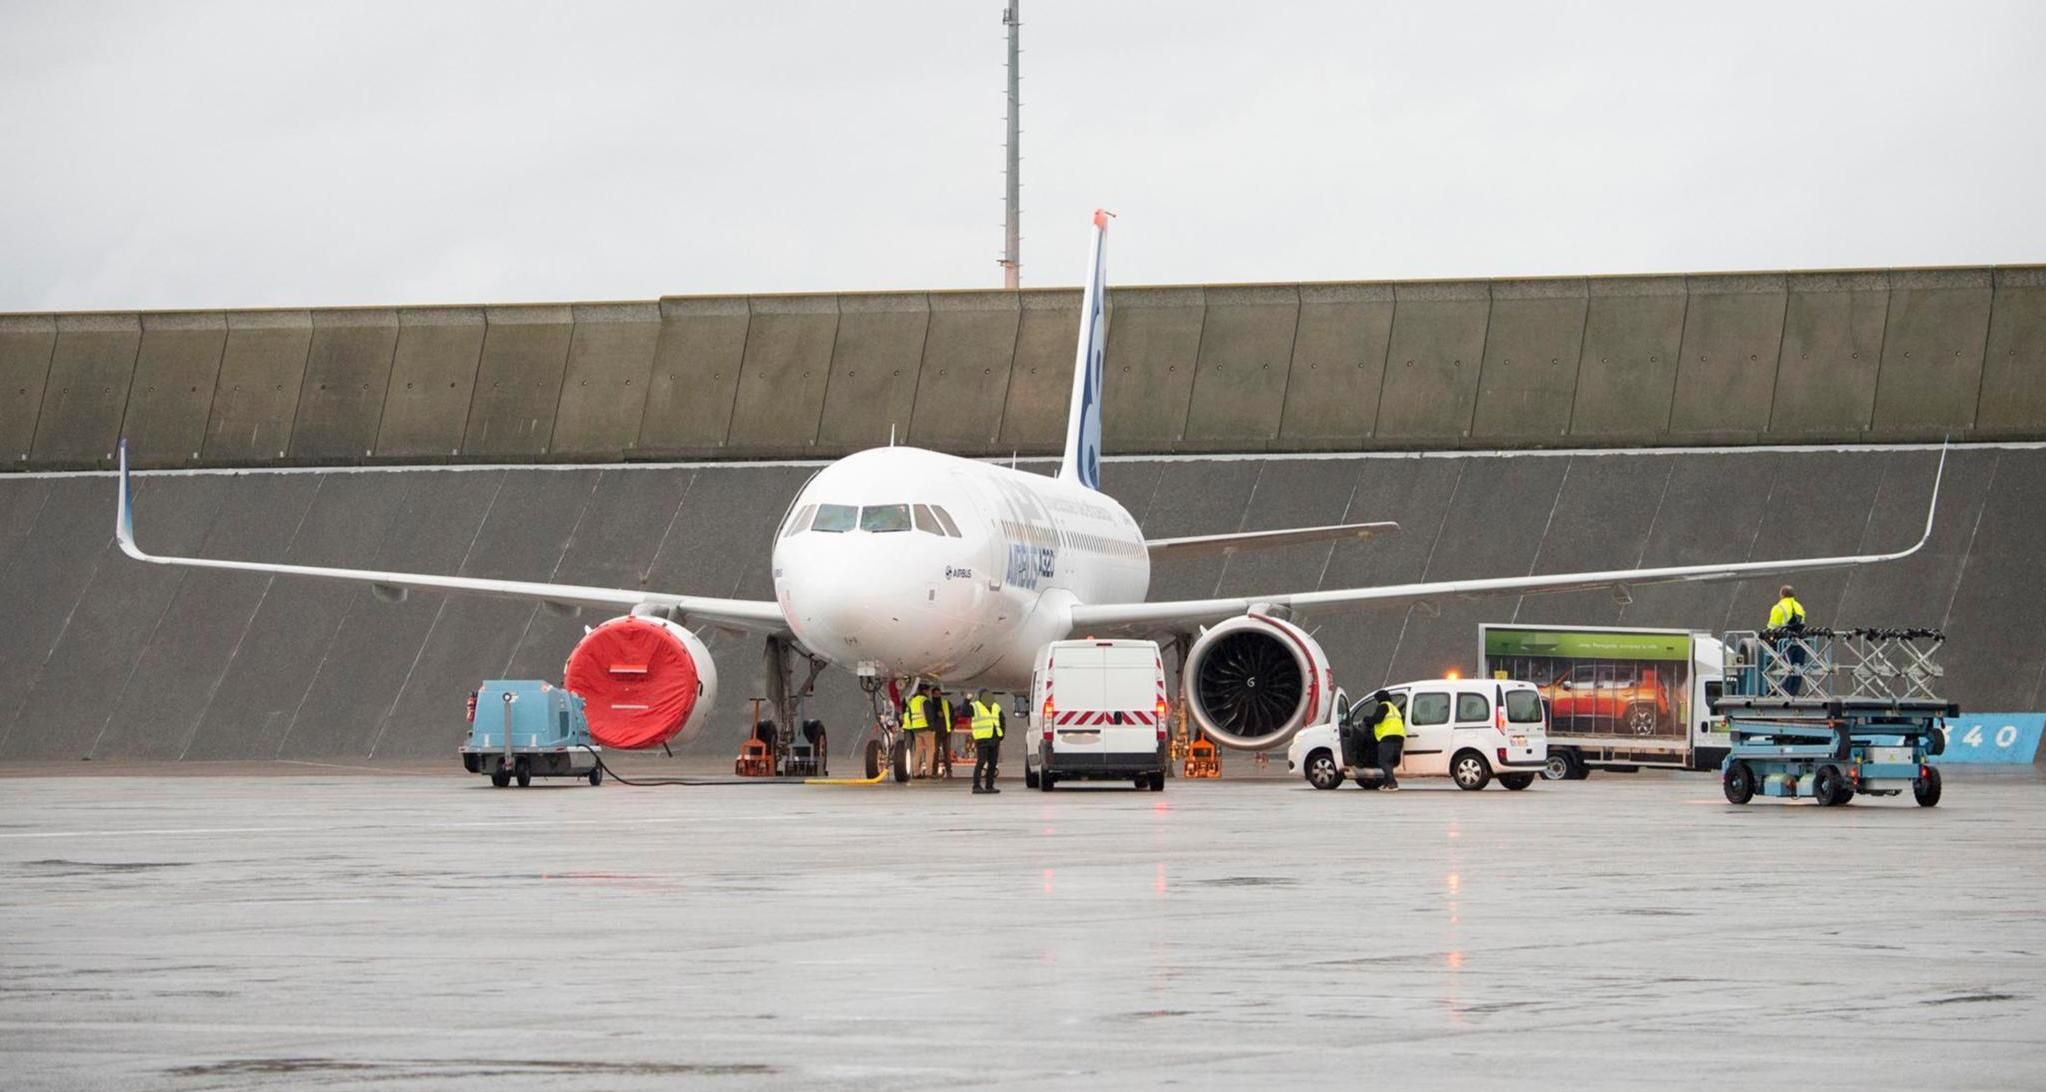 A parked aircraft, with workers putting on engine covers.